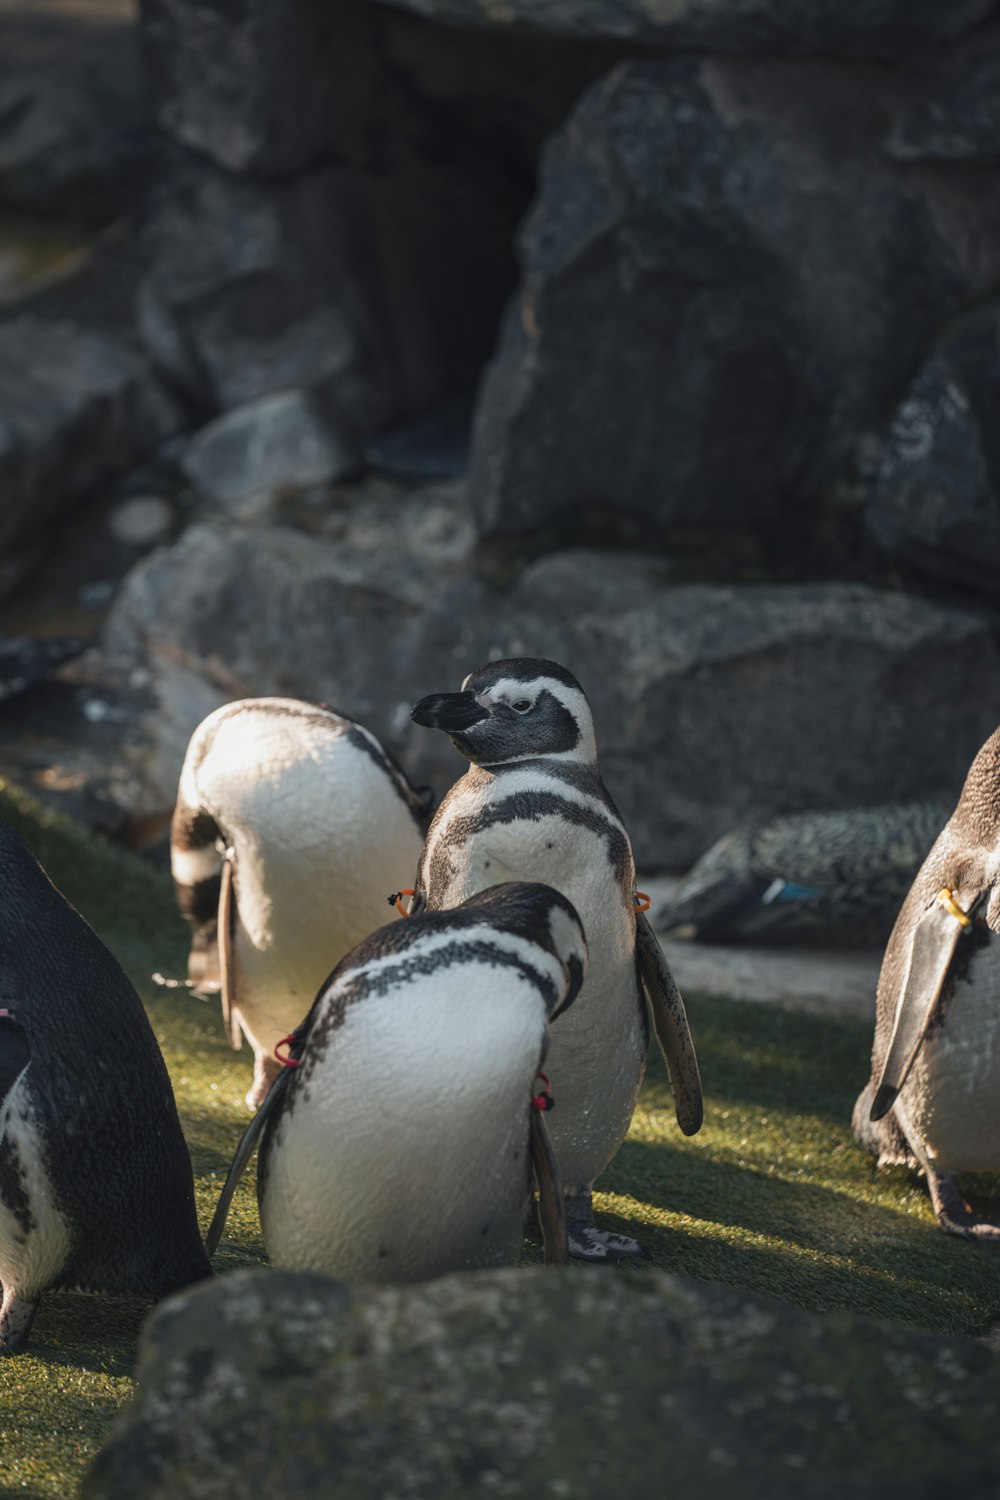 a group of penguins walking on the grass